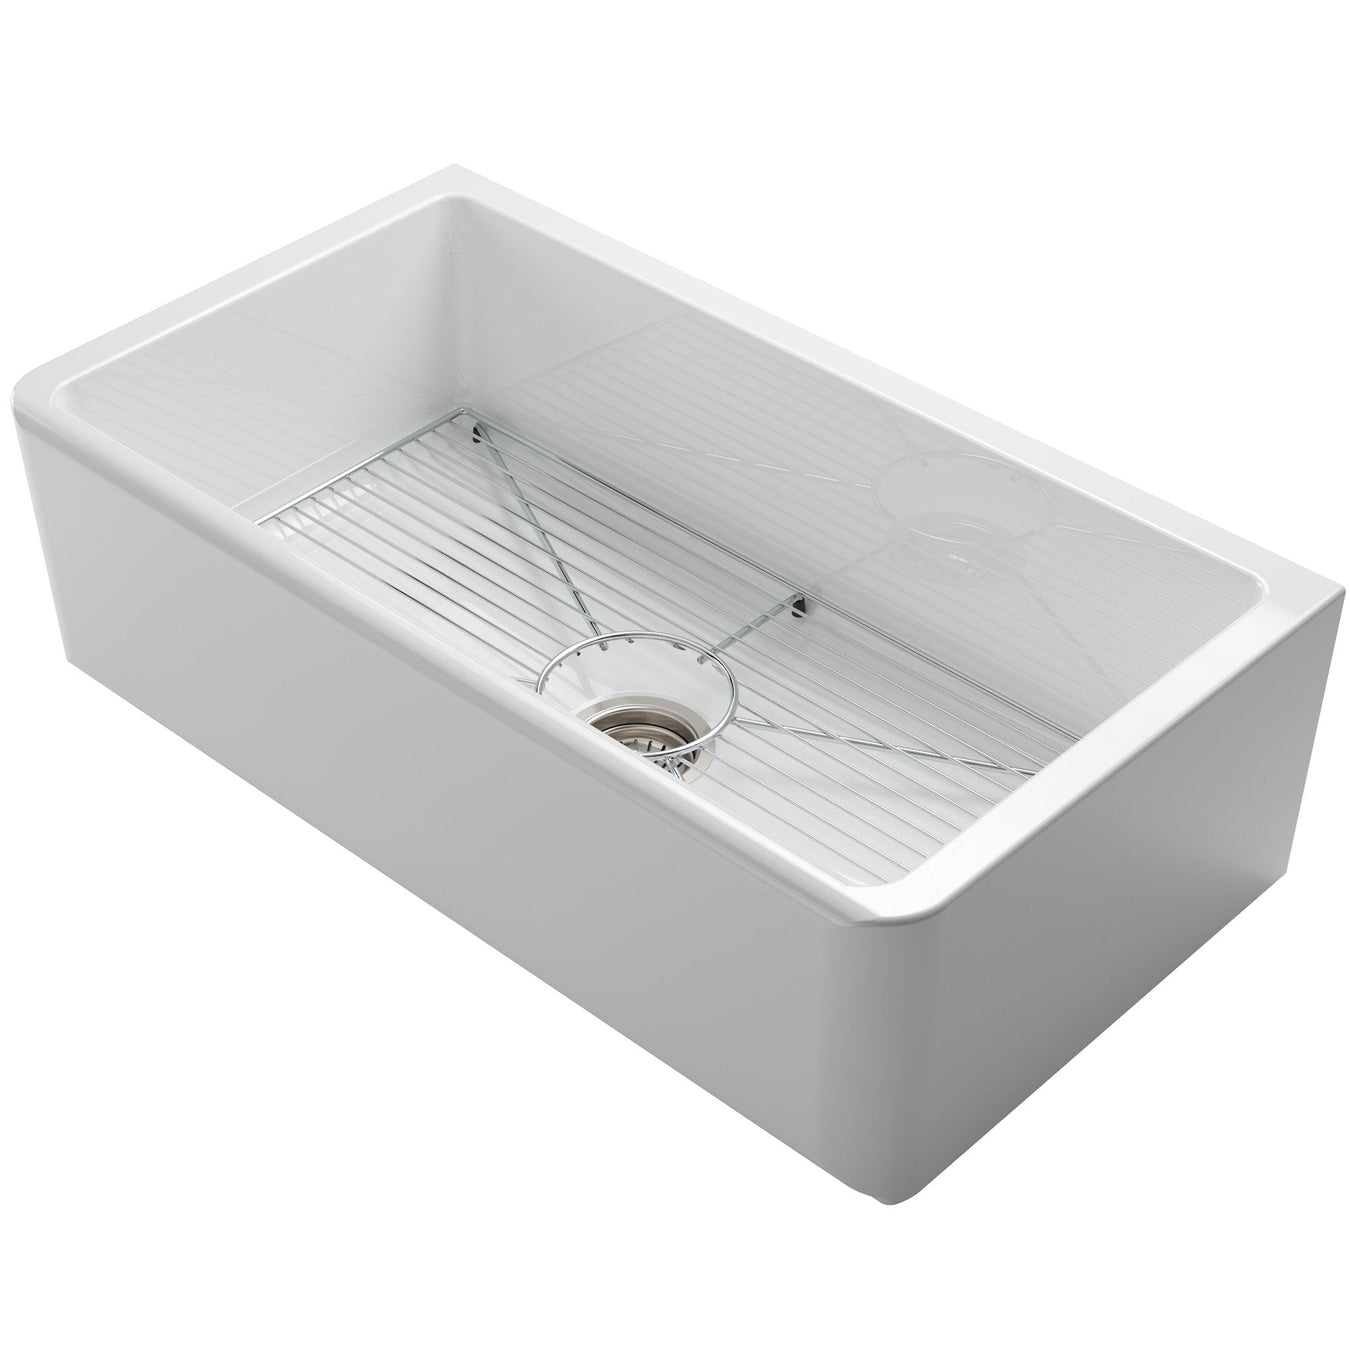 Apron Front Kitchen Sinks Selected by Designers and Renovators